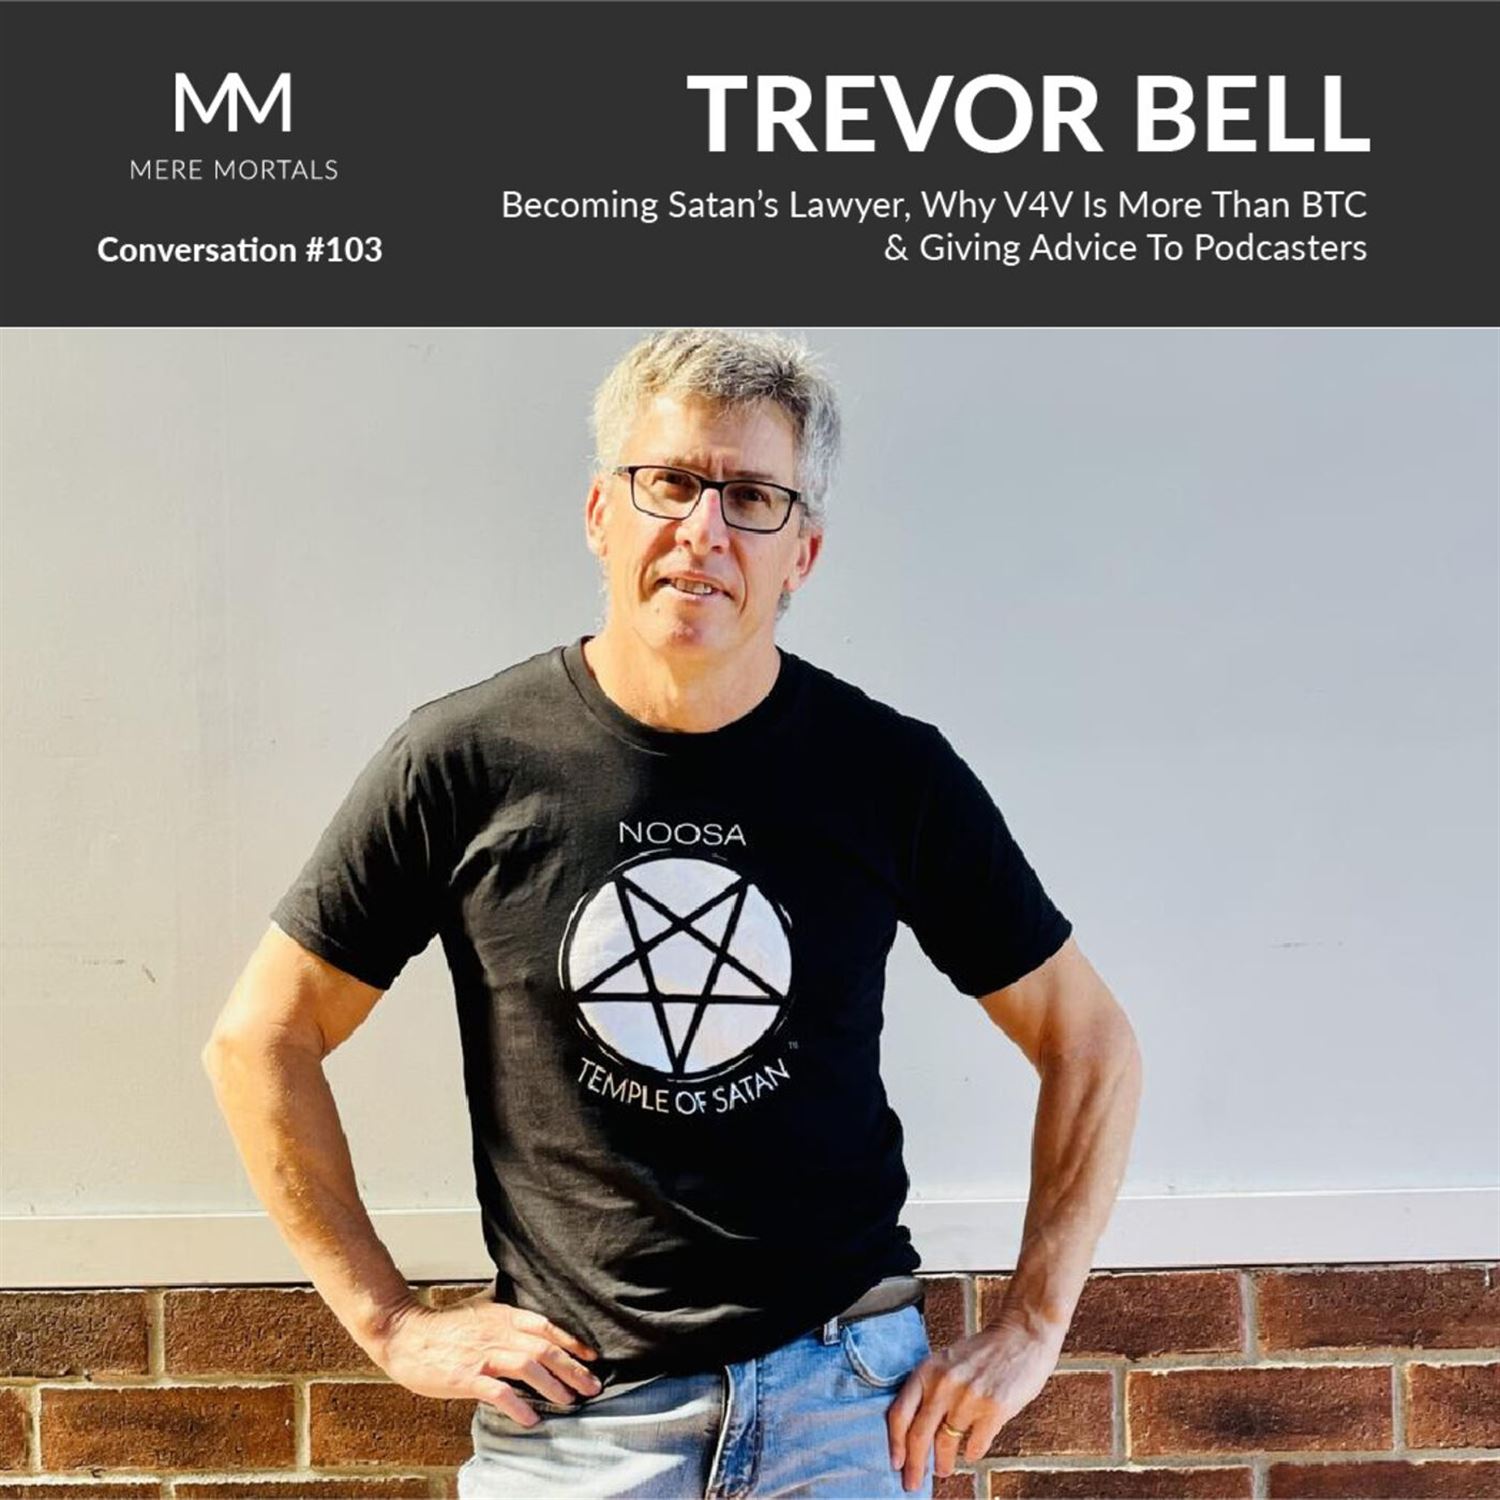 TREVOR BELL | Becoming Satan's Lawyer, Why V4V Is More Than BTC & Giving Advice To Podcasters